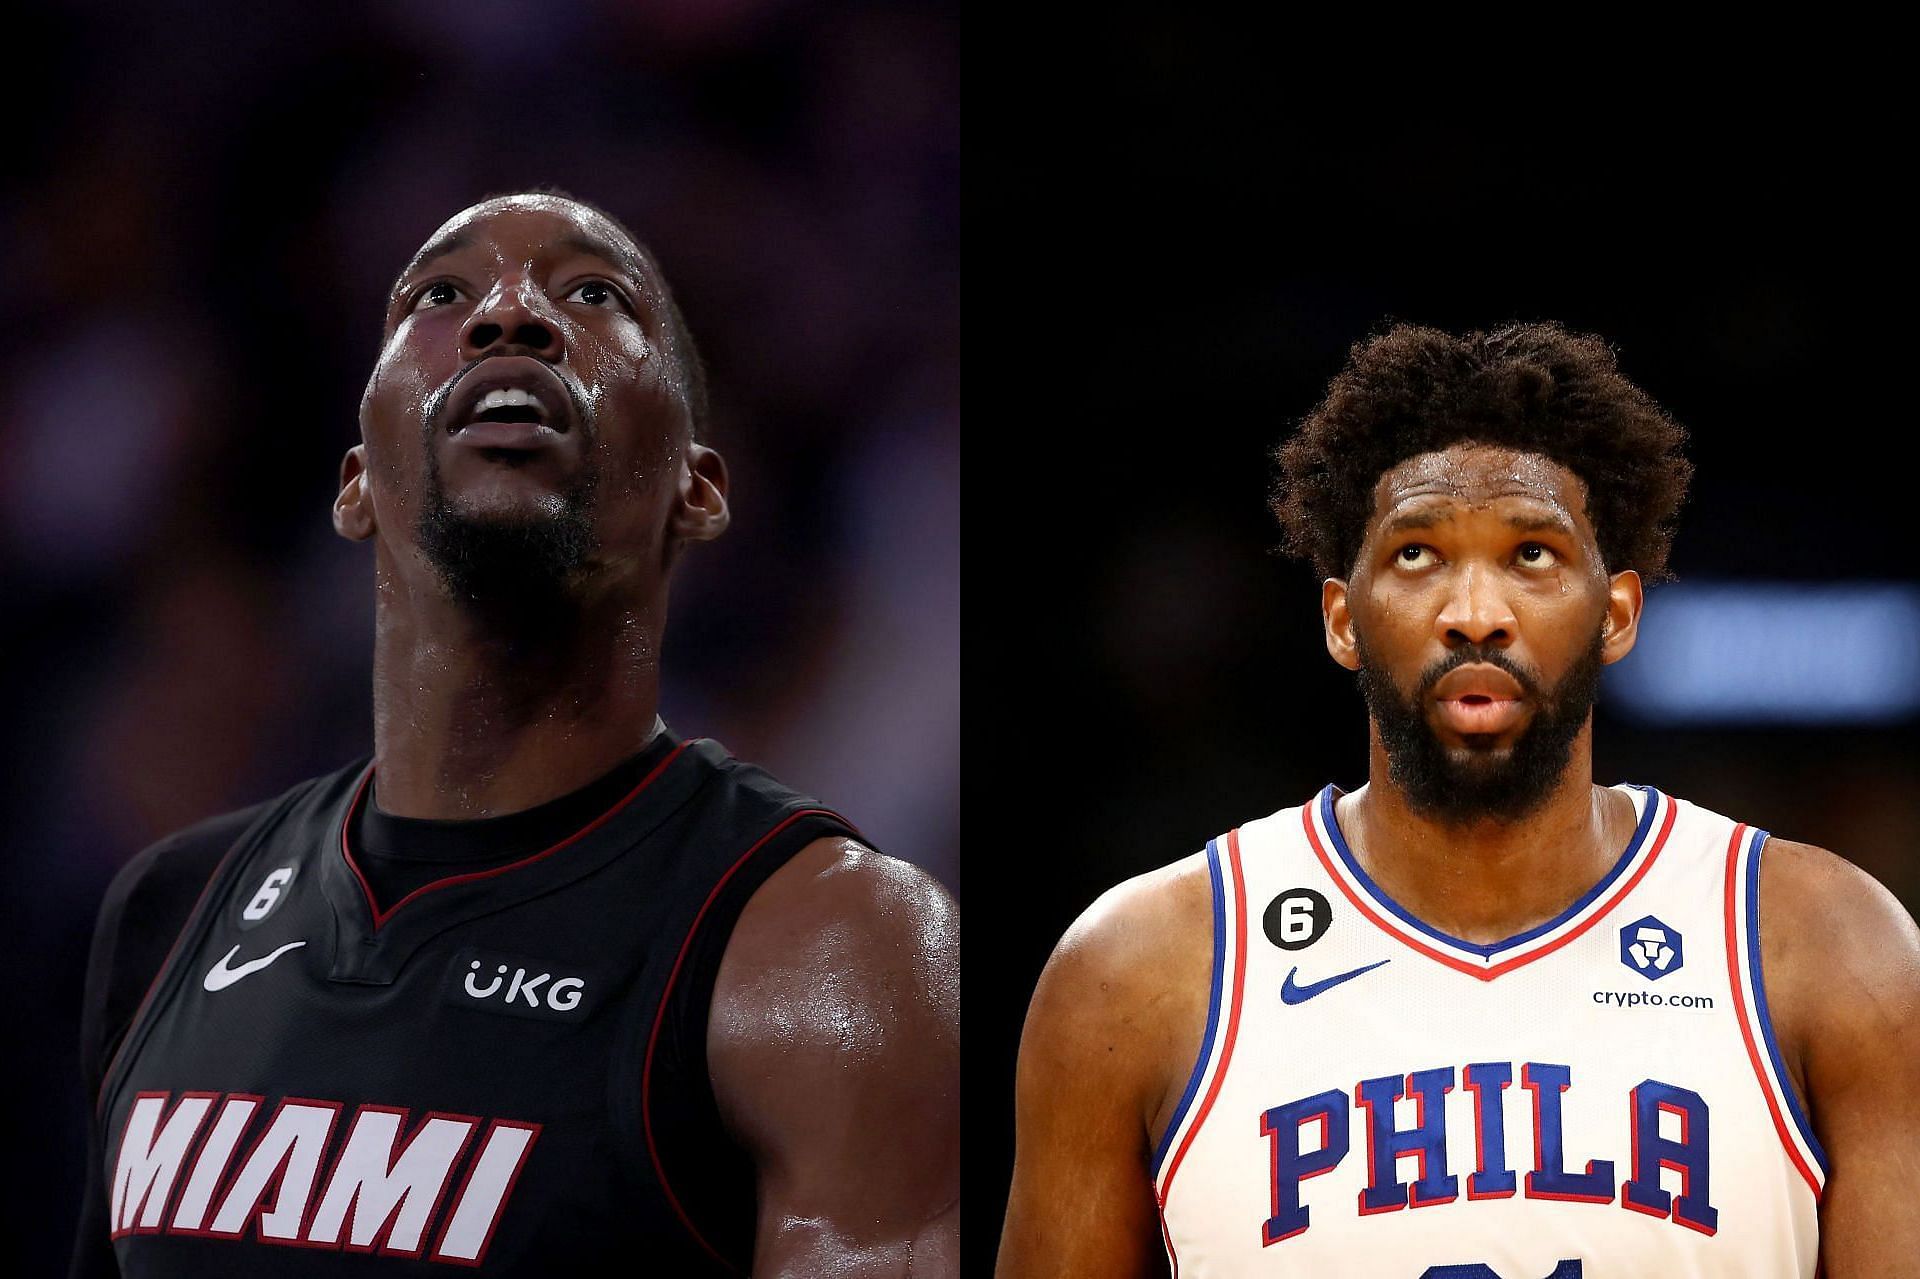 Looking at a potential Bam Adebayo trade for Joel Embiid